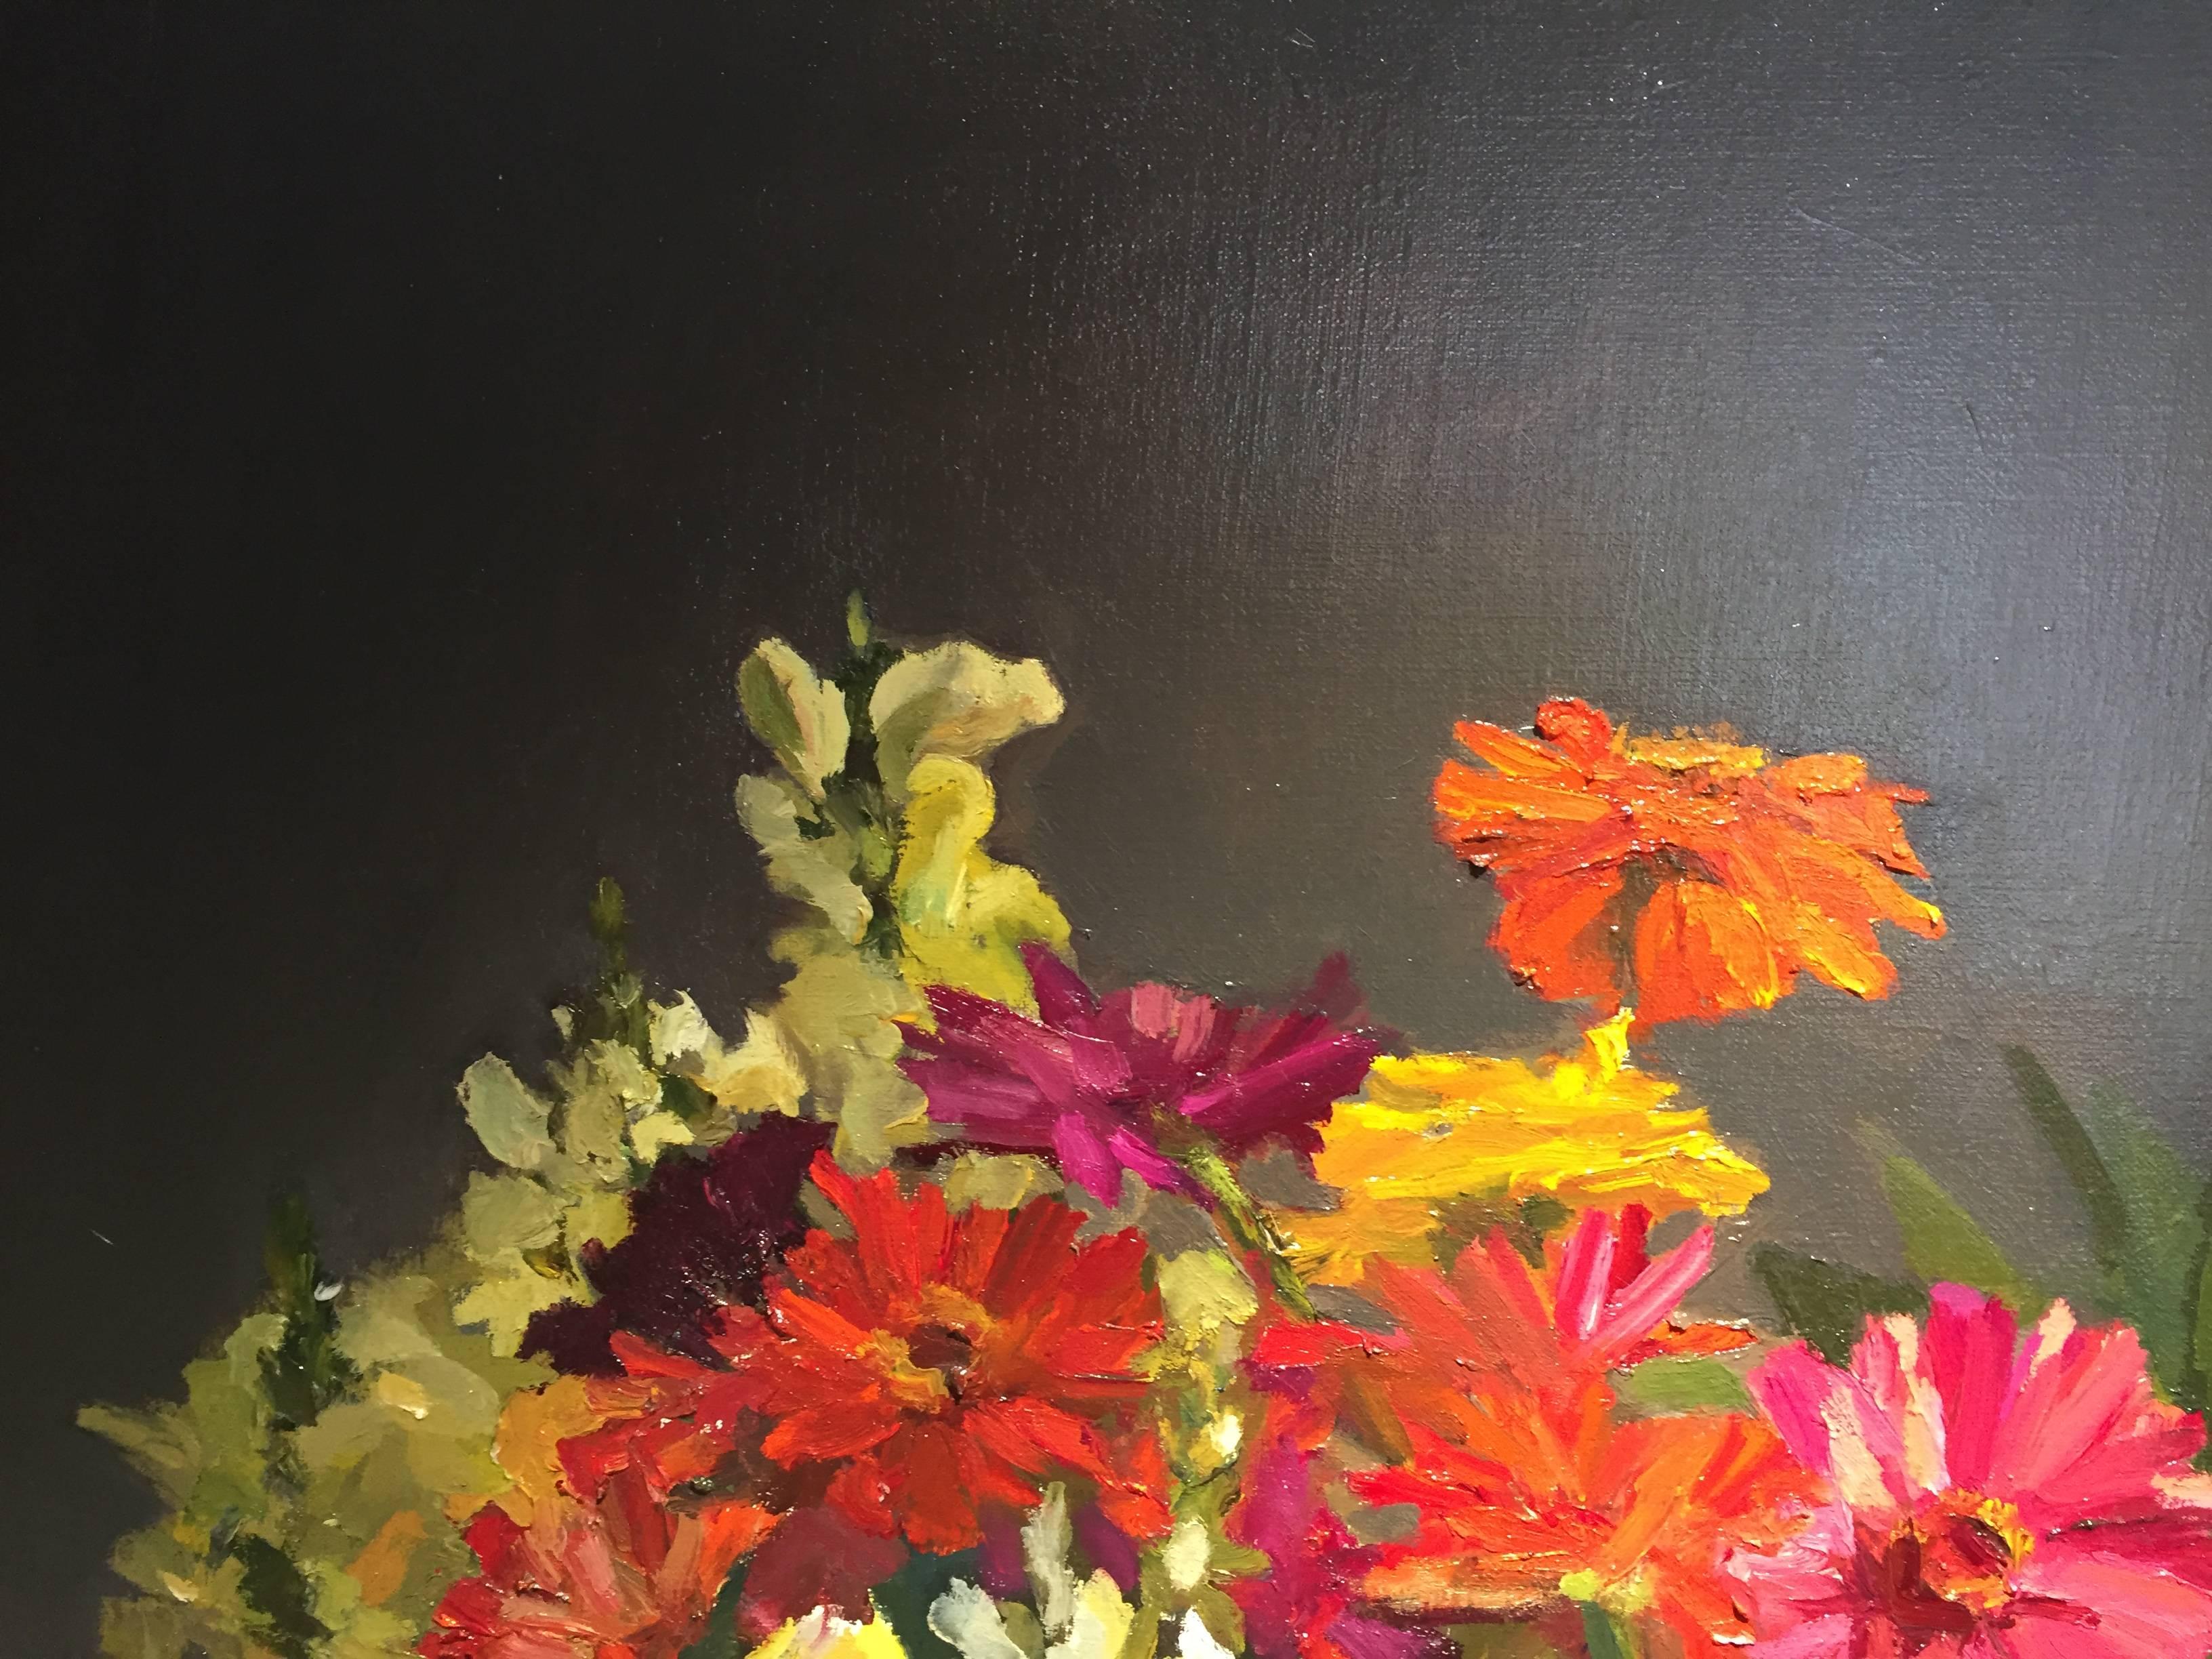 Zinnias, Snapdragons and Fruit - Black Still-Life Painting by Maryann Lucas